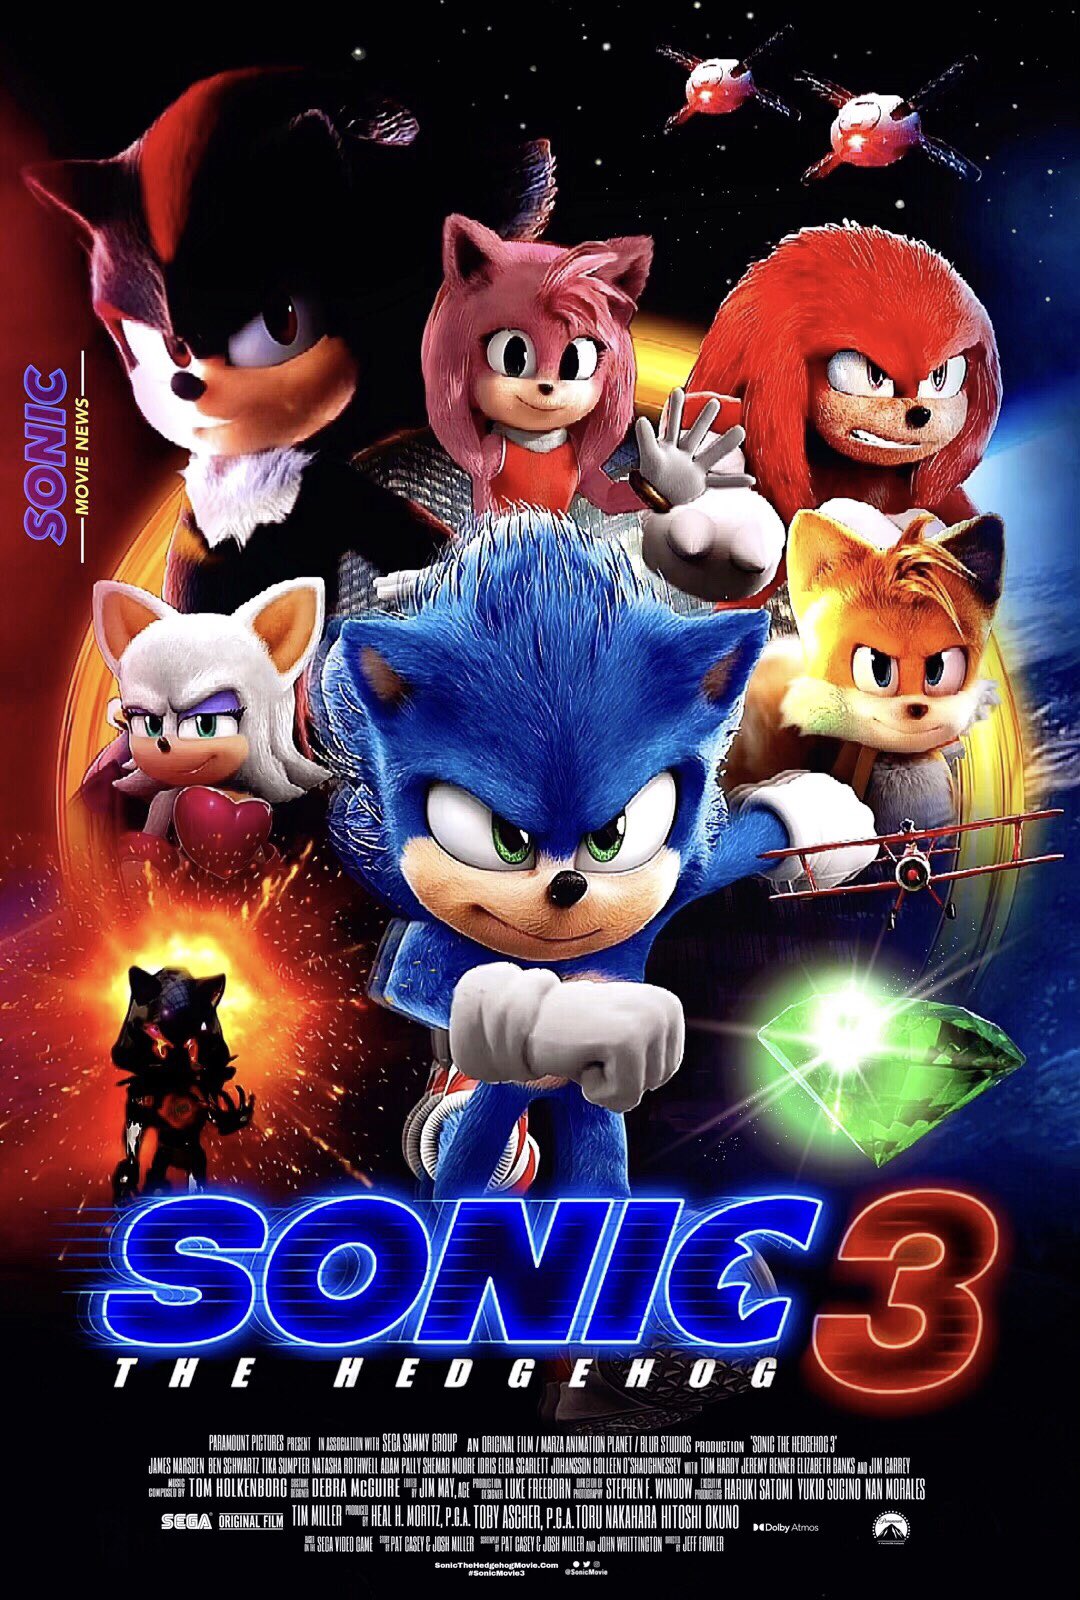 Sonic movienews on X: Sonic The Hedgehog 3 hits movie theaters on December  20th 2024! 🔥 Poster design: @sonicmovienews 👀 #sonic #sonicmovie  #sonicmovie3 #sonicthehdgehog #knuckles #knucklestheechidna #amyrose  #posterdesign #MoviePoster